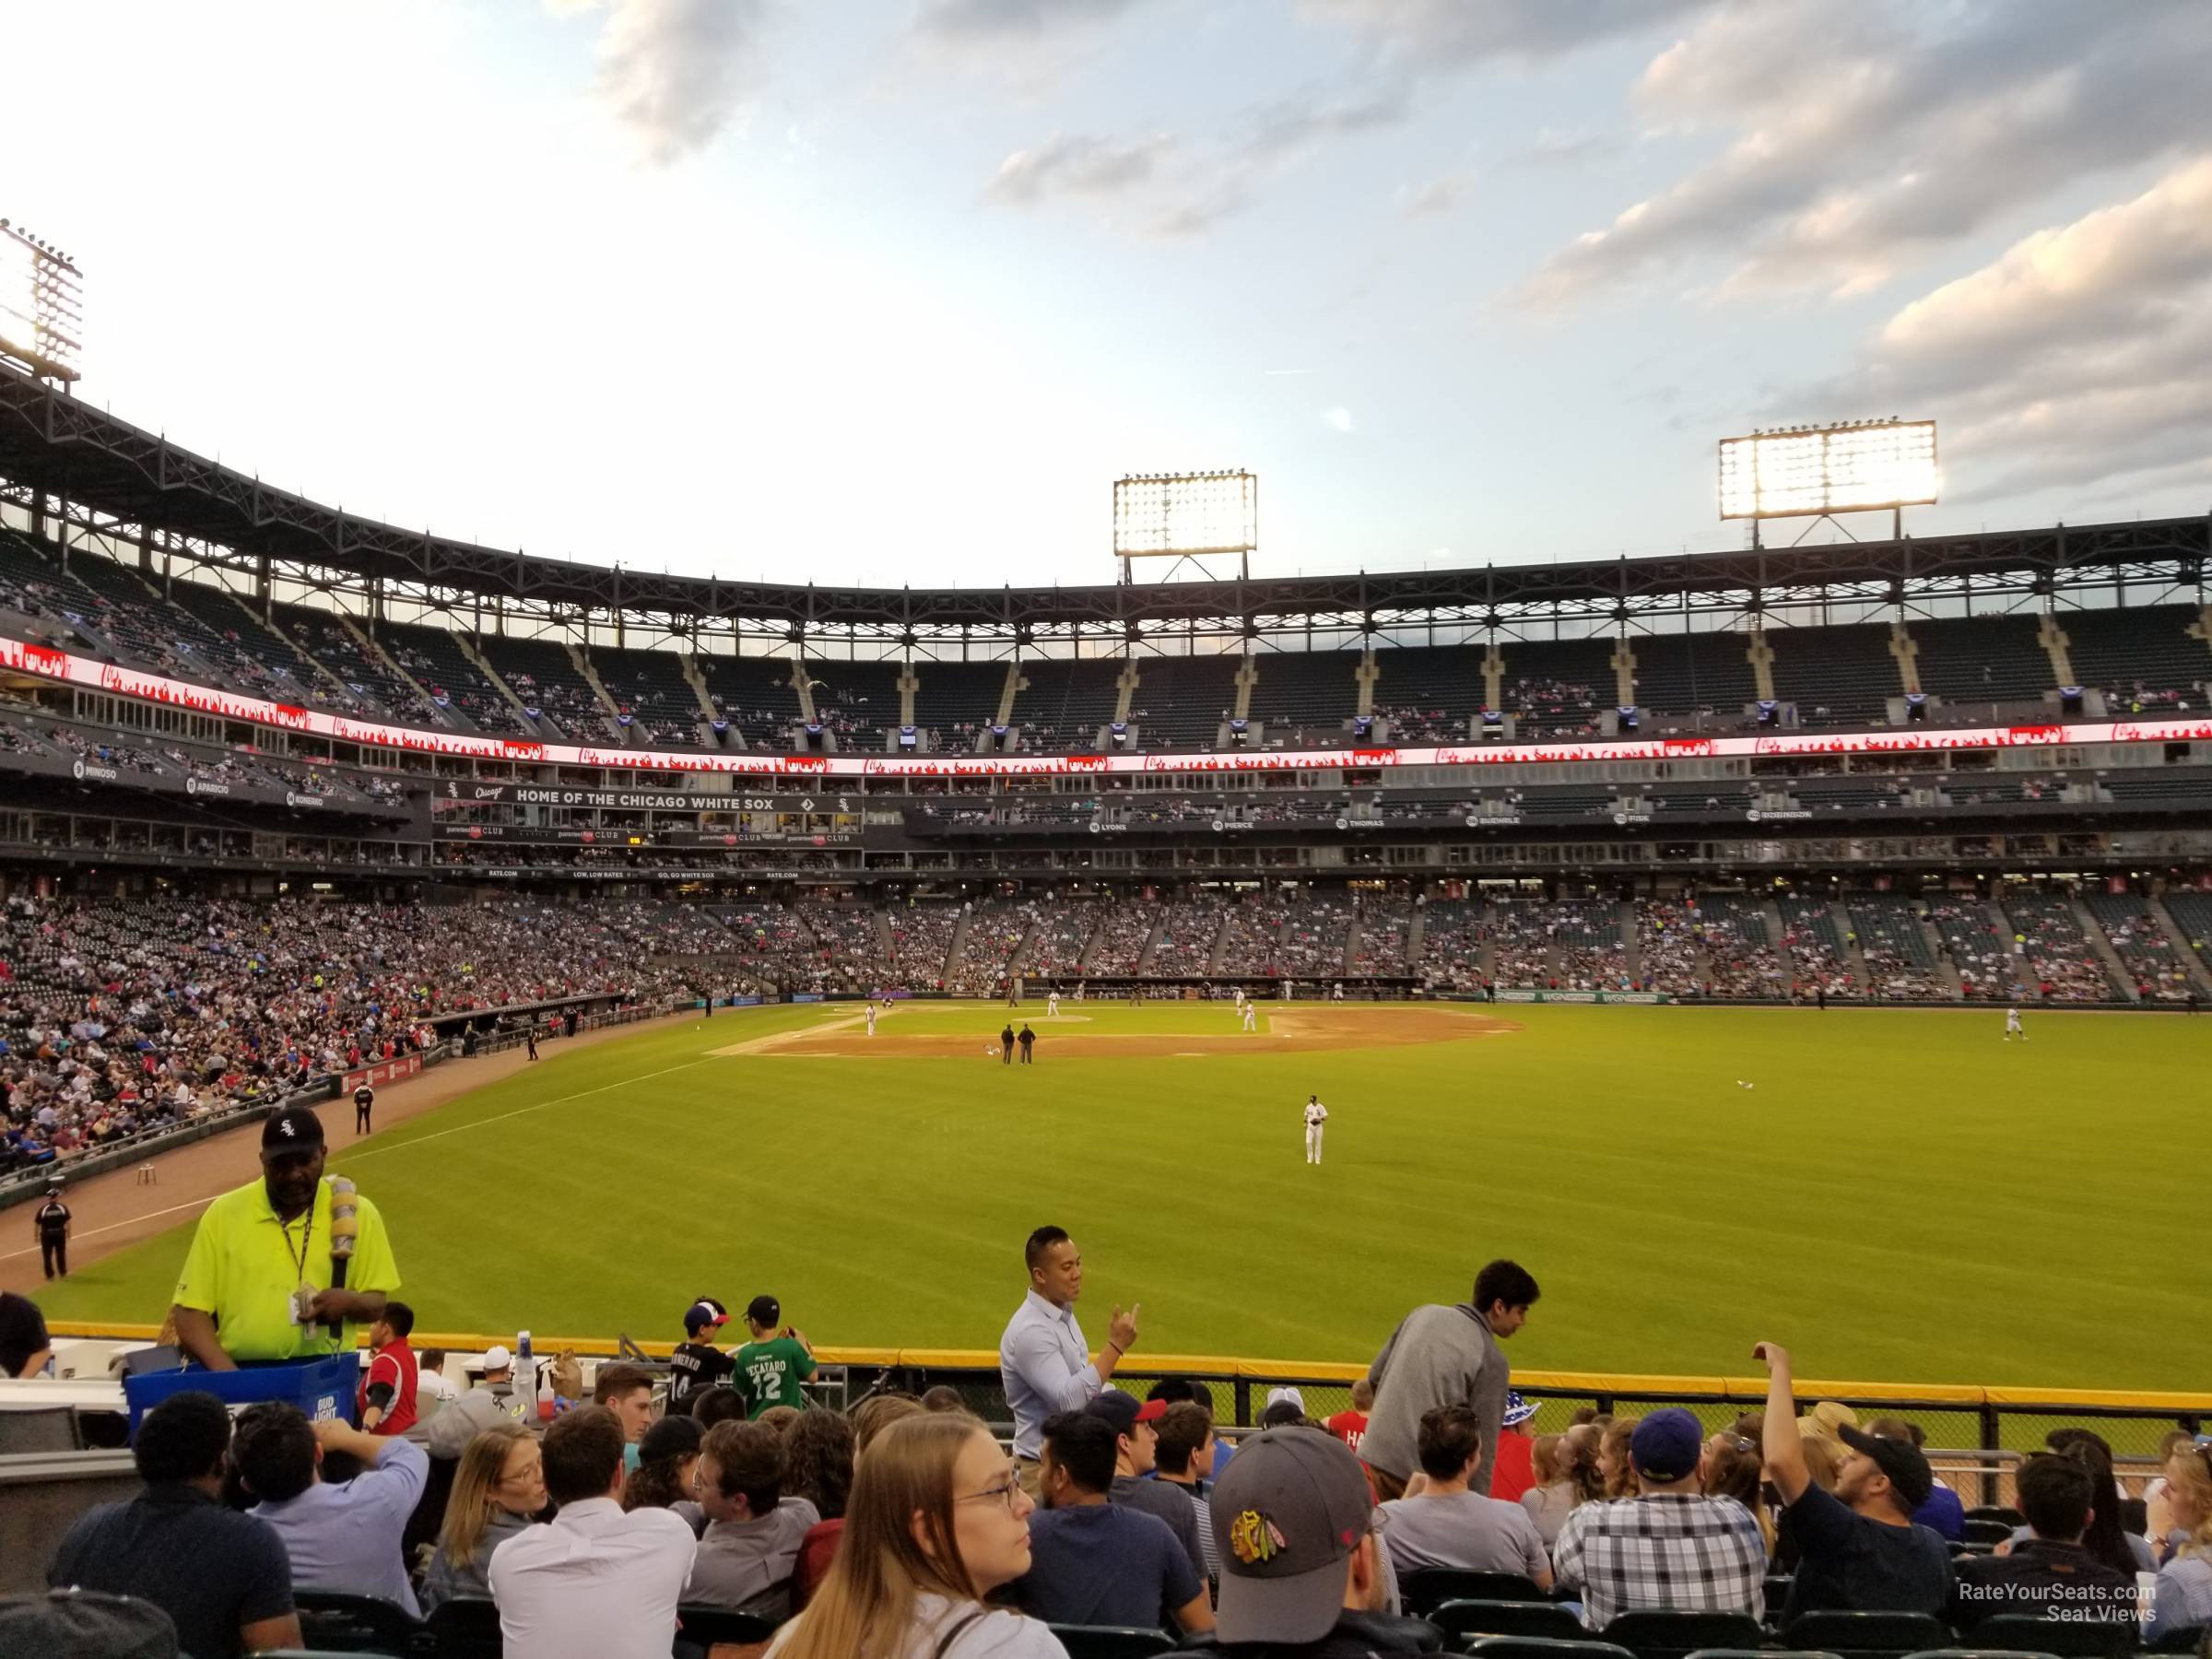 section 105, row 21 seat view  - guaranteed rate field